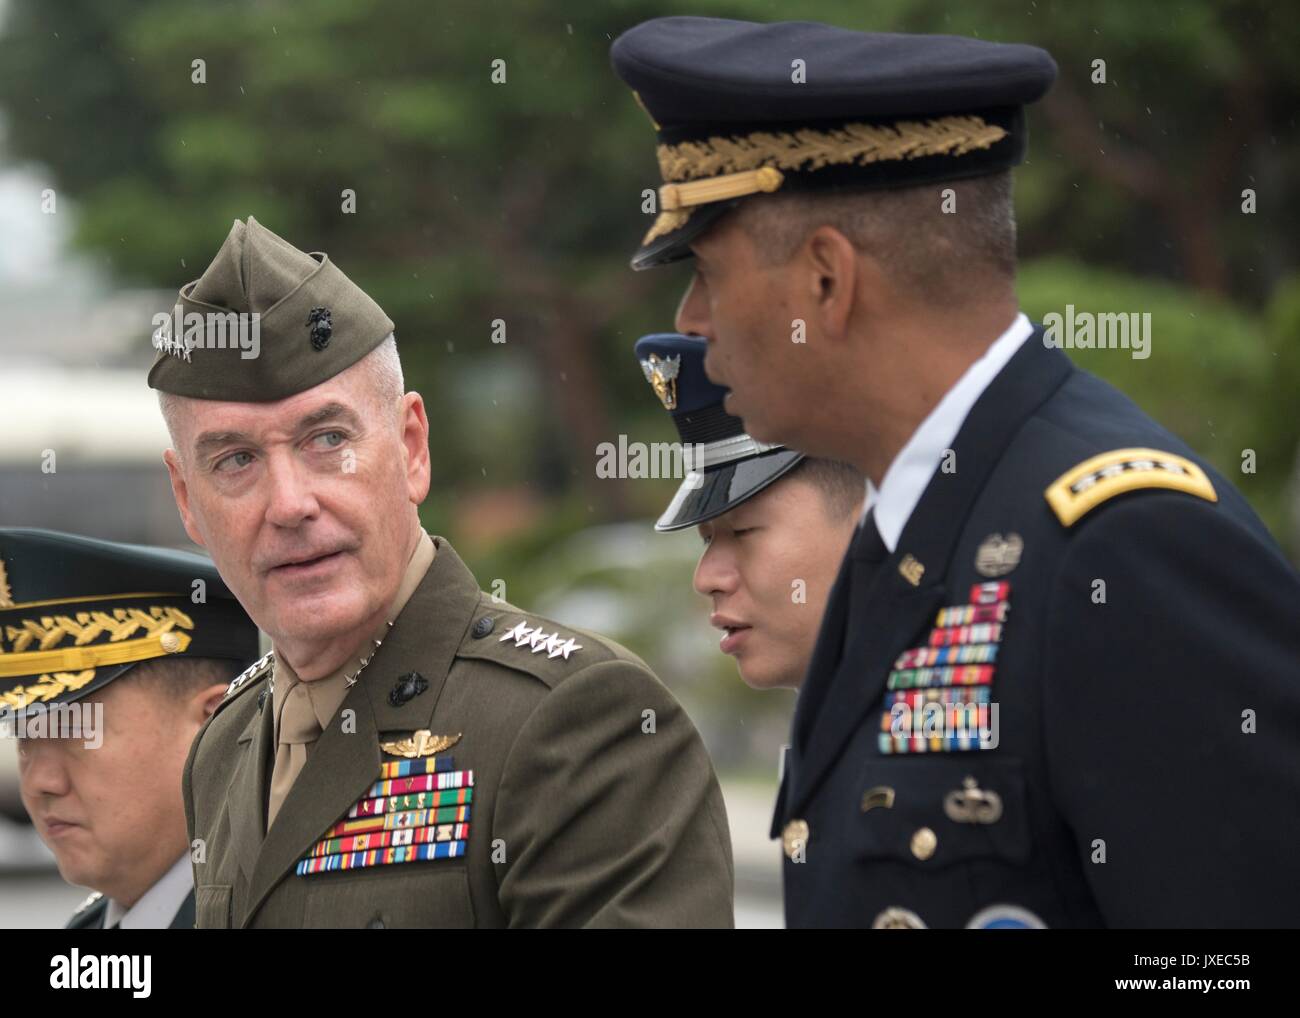 U.S. Chairman of the Joint Chiefs Gen. Joseph Dunford, left, walks with Army Gen. Vincent Brooks, commander, U.S. Forces Korea following a press conference outside Combined Forces Command August 14, 2017 in Seoul, South Korea. Dunford is meeting military leaders in the Asia-Pacific region as tensions rise with North Korea over nuclear and ballistic missiles tests. Stock Photo